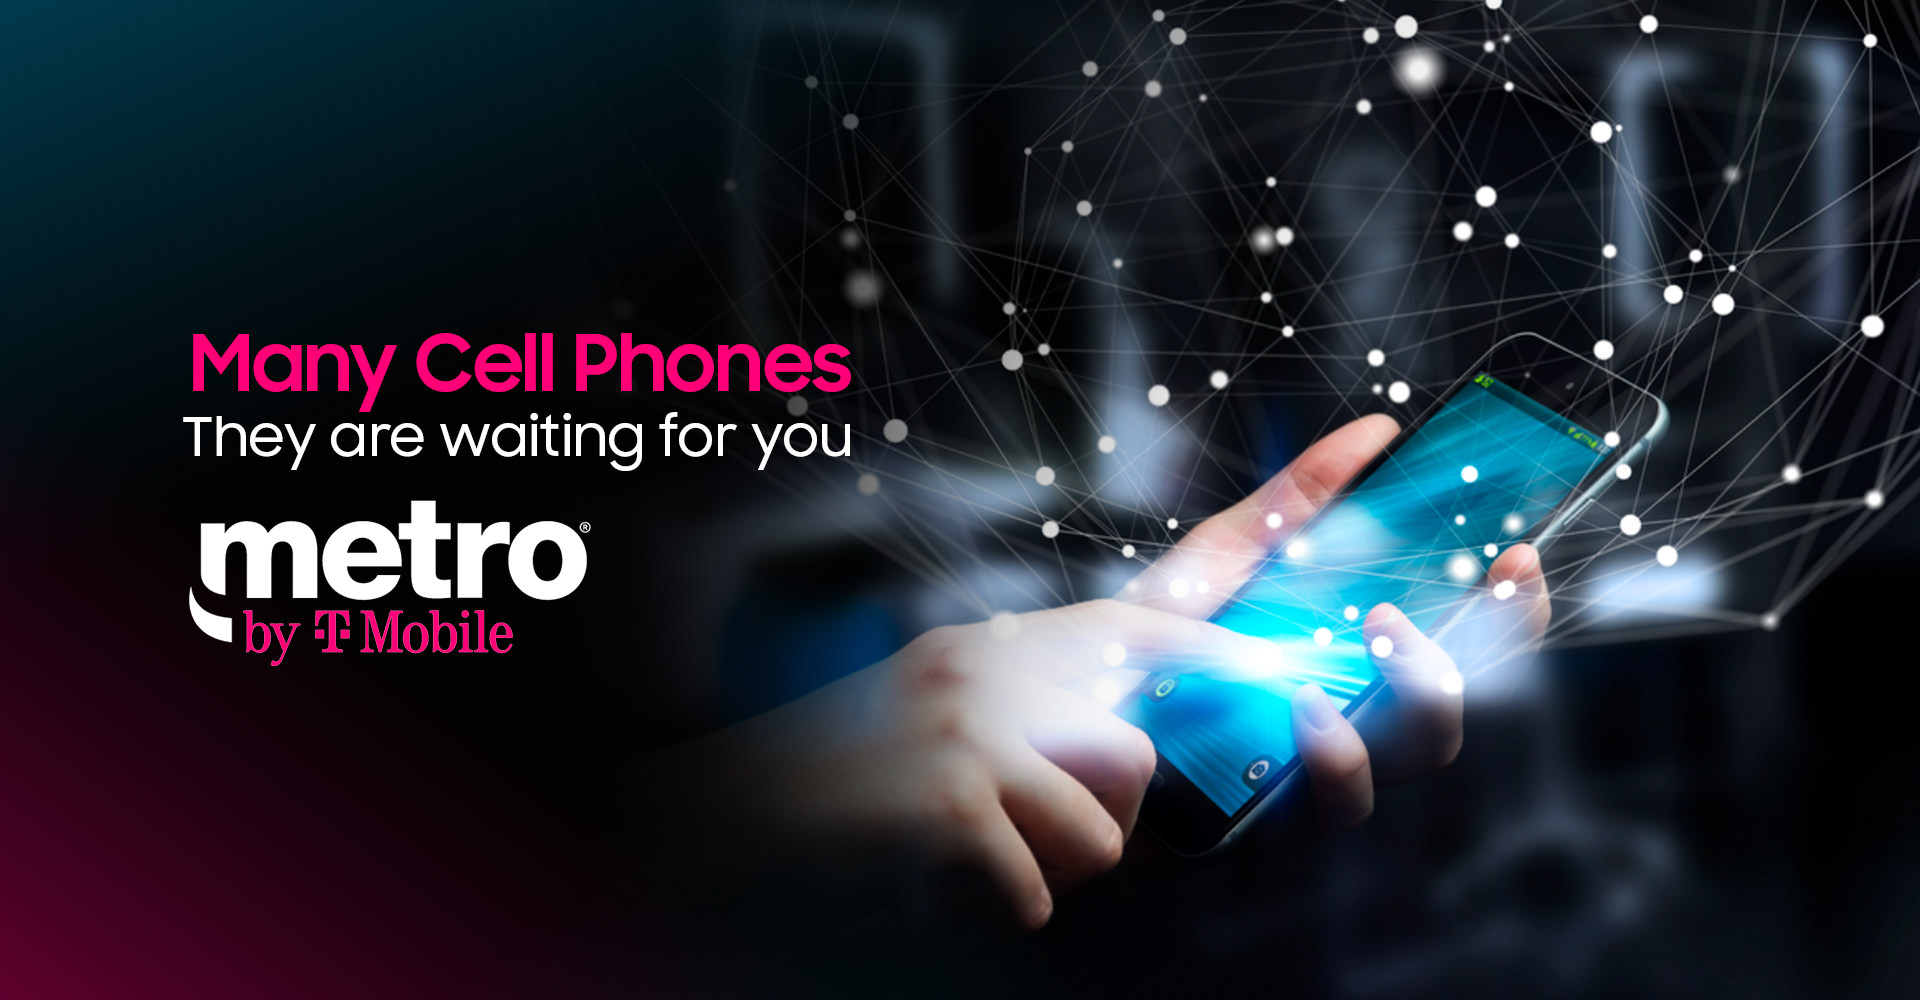 Brazcom Wireless - Many Cell Phones By T-Mobile